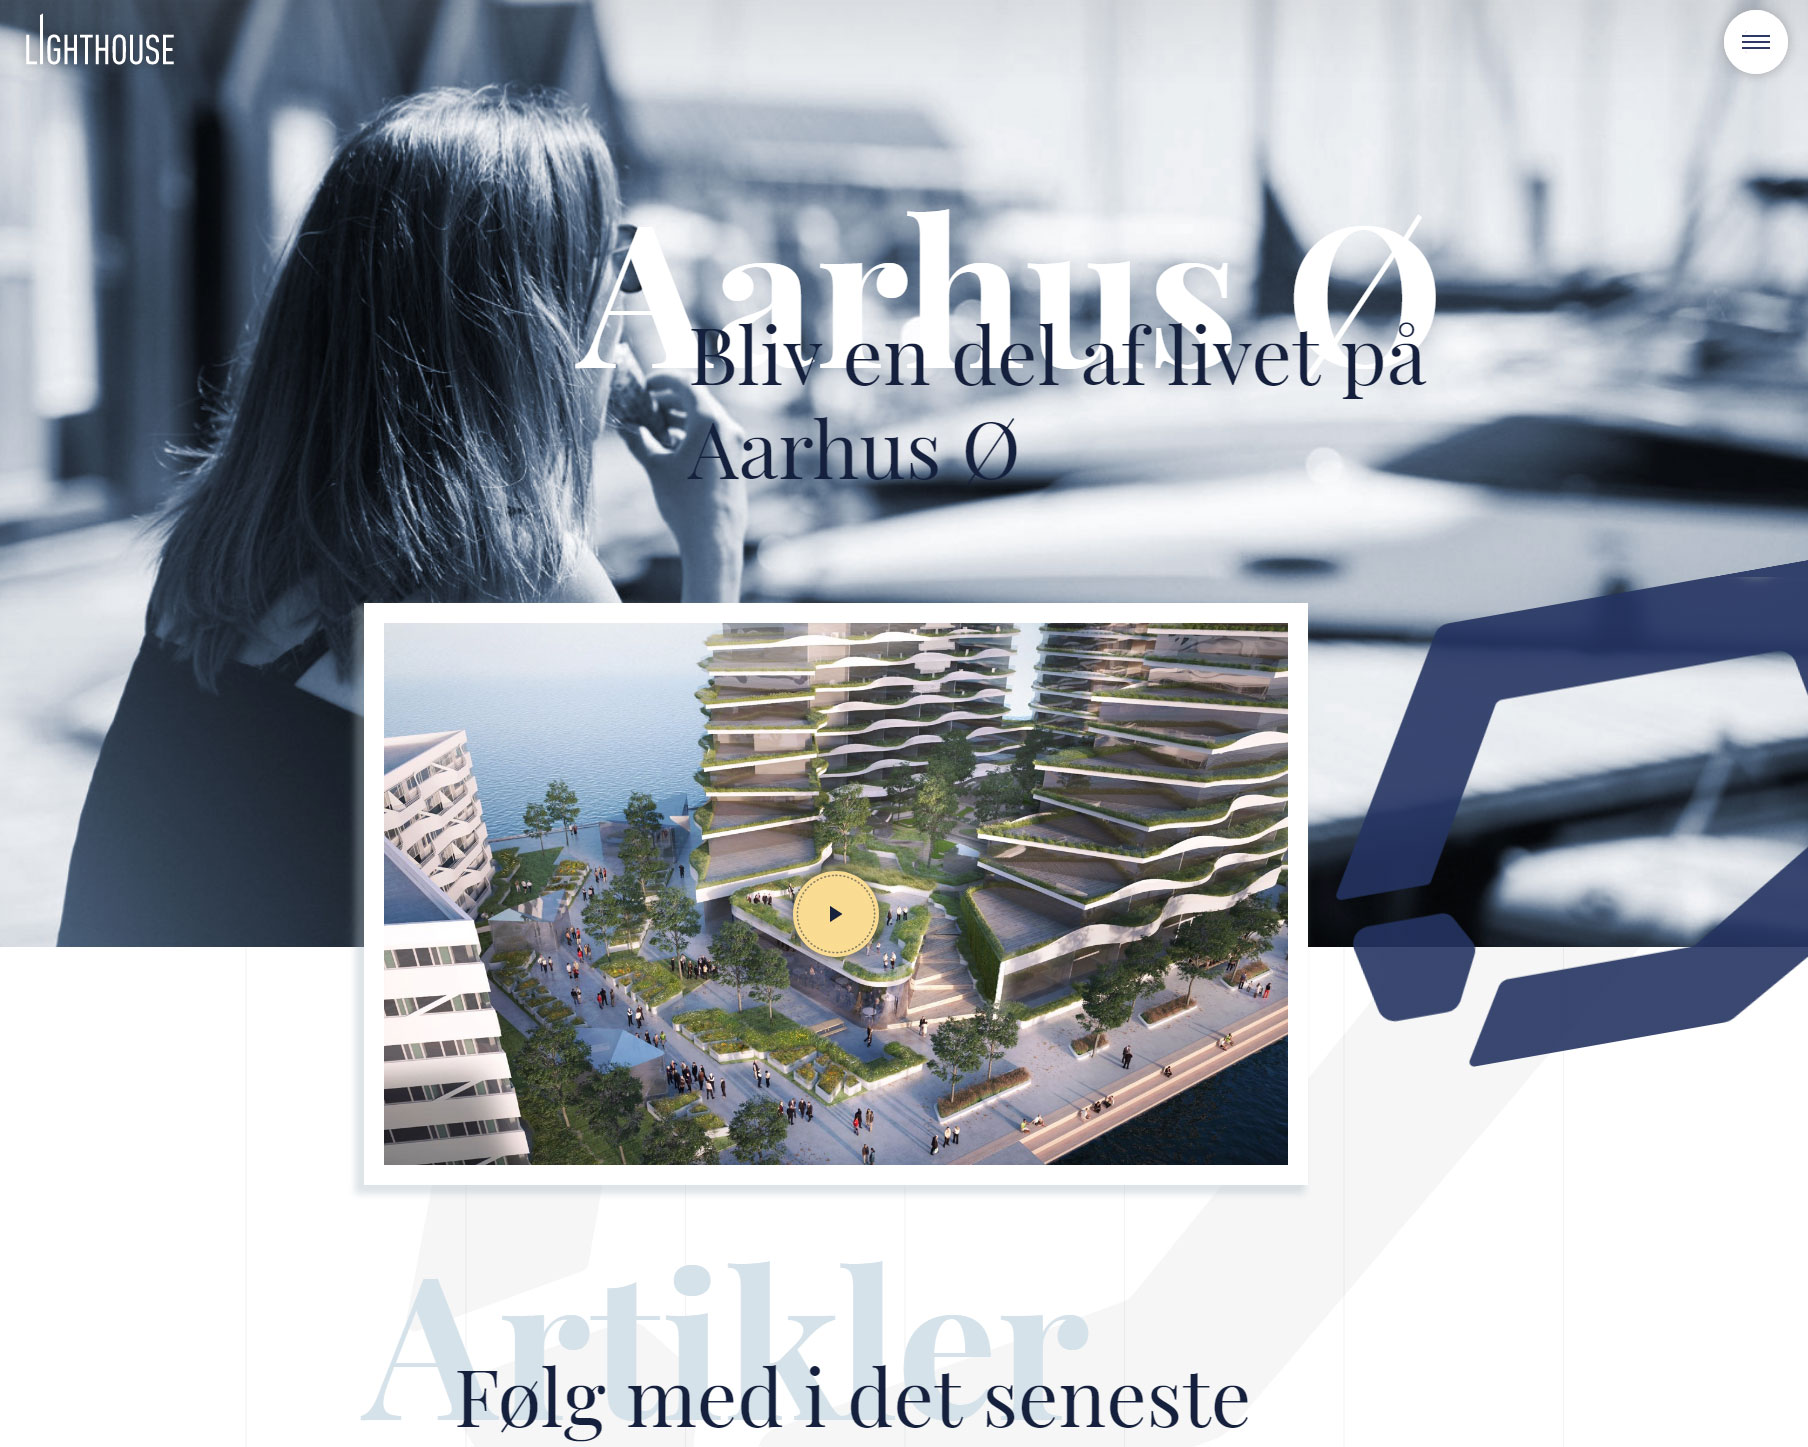 Lighthouse Aarhus - Website of the Day